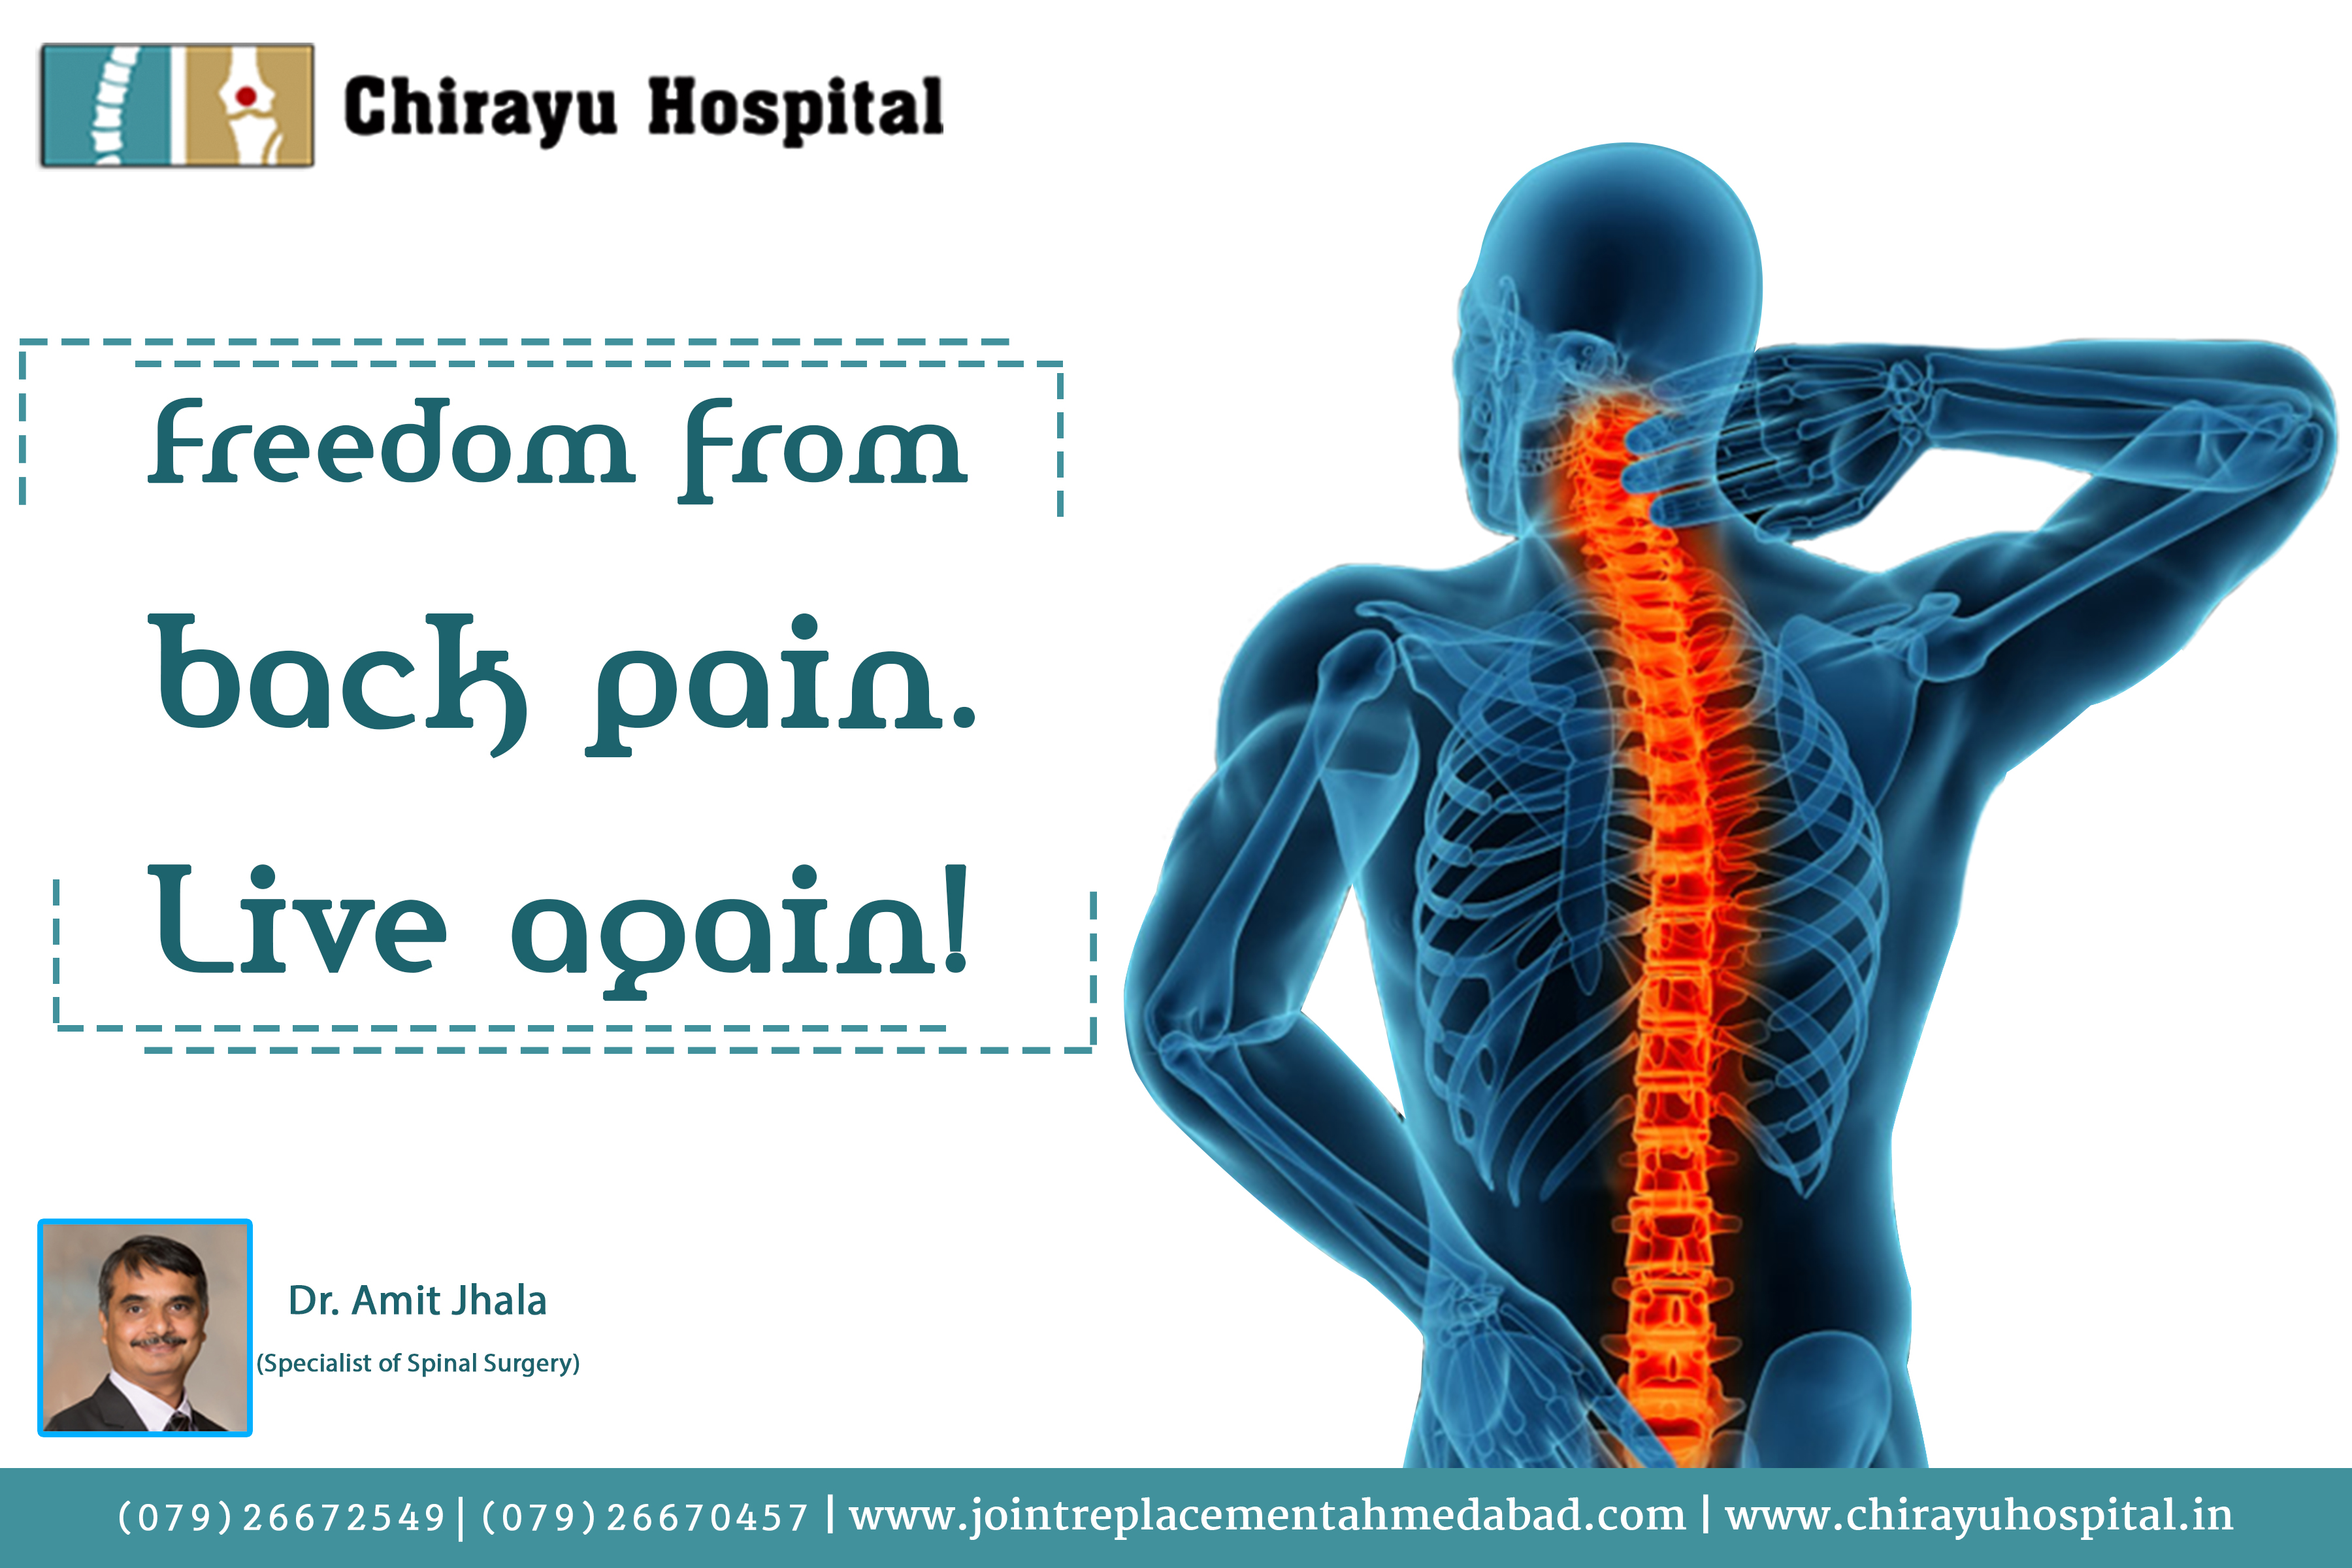 Chirayu Hospital - Joint Replacement Medical Services | Hospitals